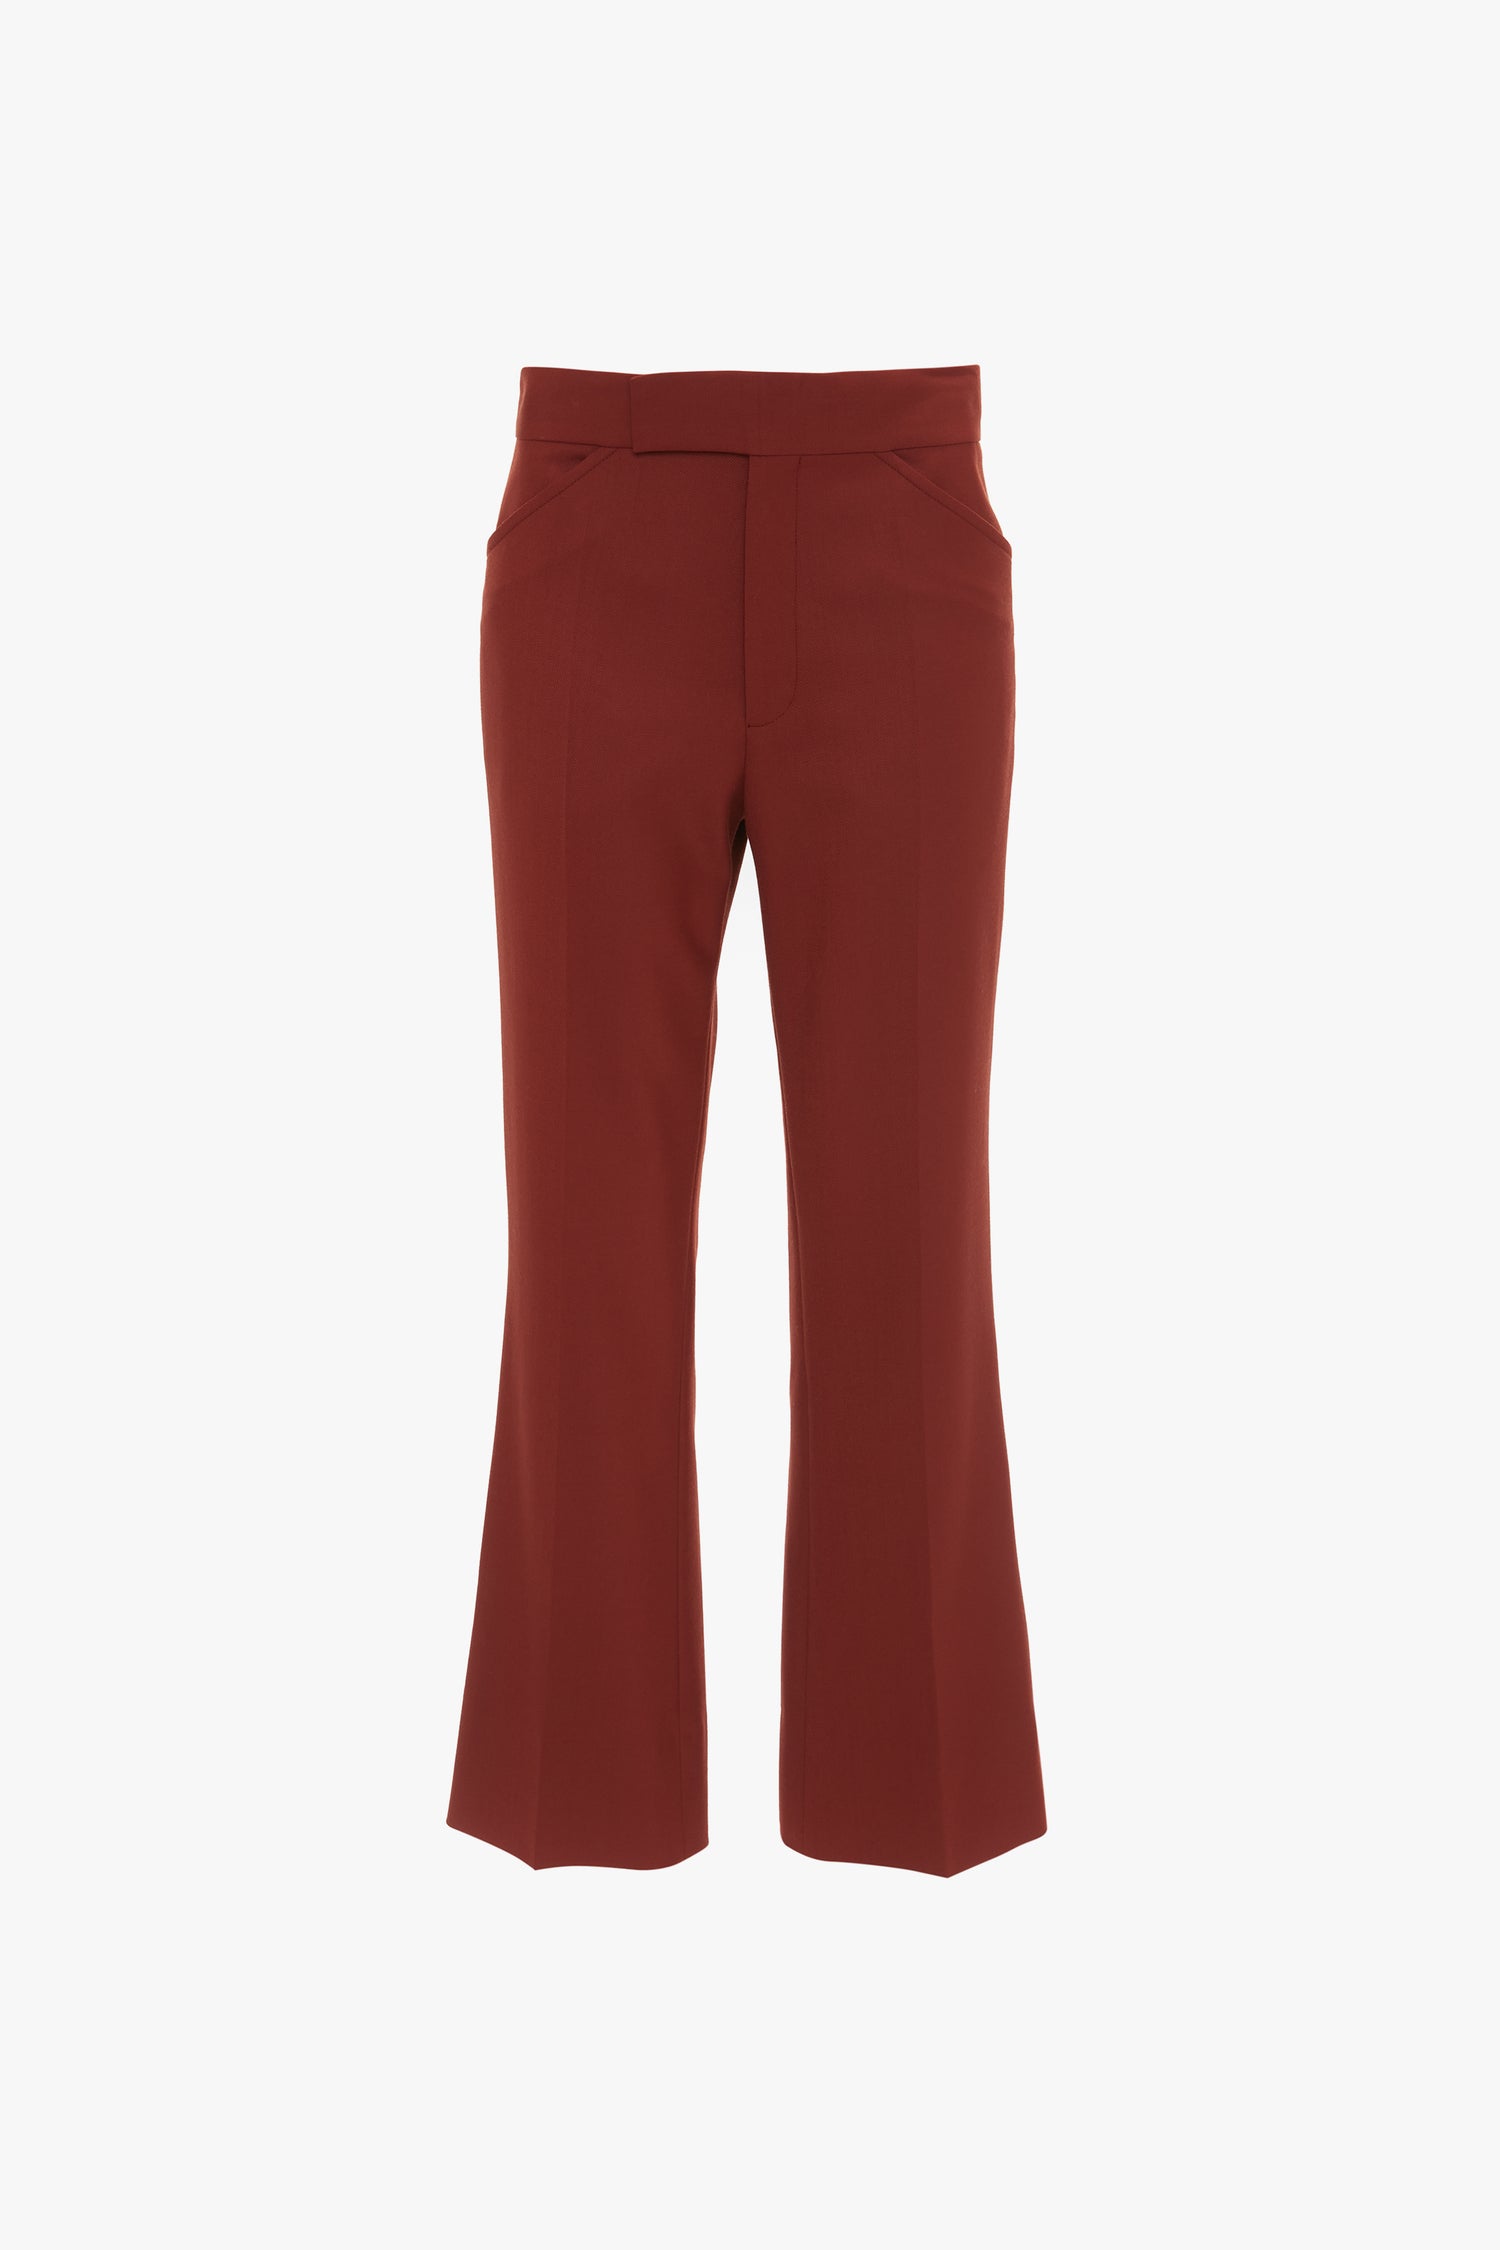 A pair of Victoria Beckham Wide Cropped Flare Trouser In Russet, featuring a tailored waistband and front pockets. These 1970s-inspired trousers add a retro chic vibe to any outfit.